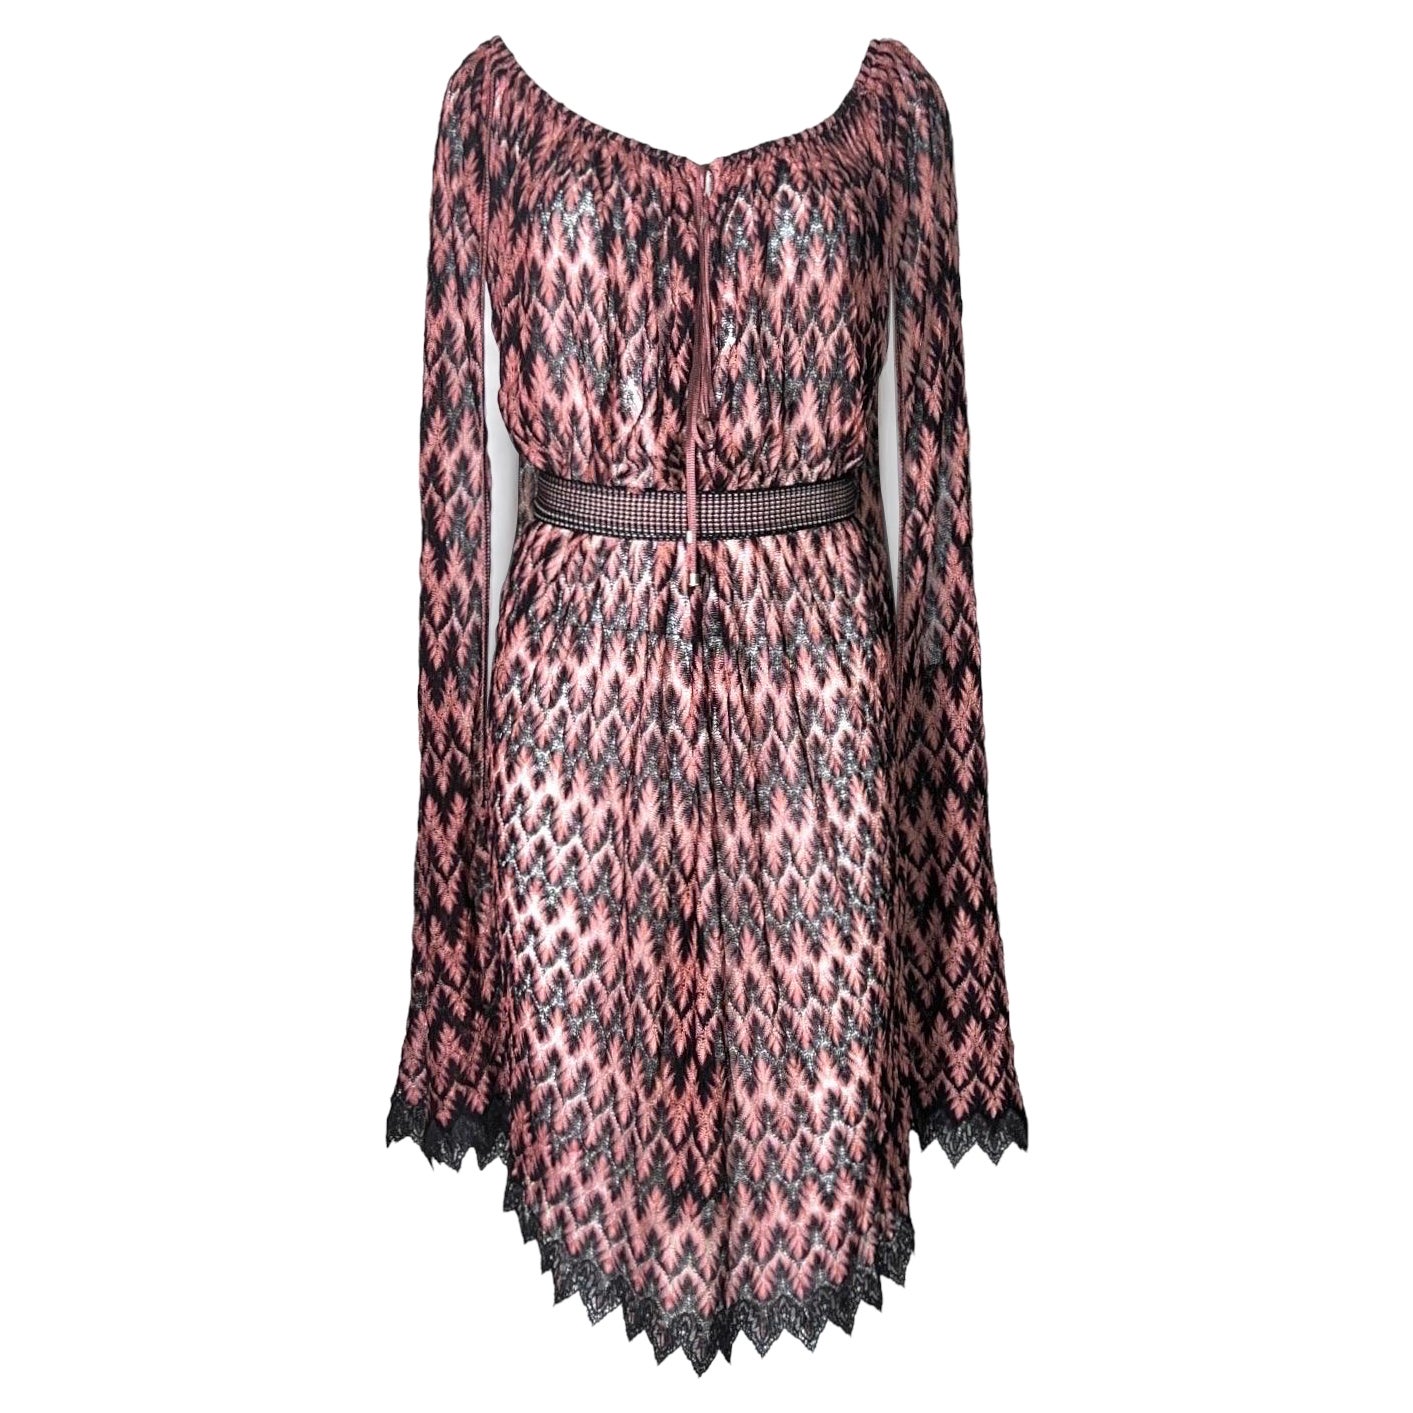 NEW Missoni Rare Belted Cape Dress Peek-a-boo neckline & Lace Trimming S For Sale